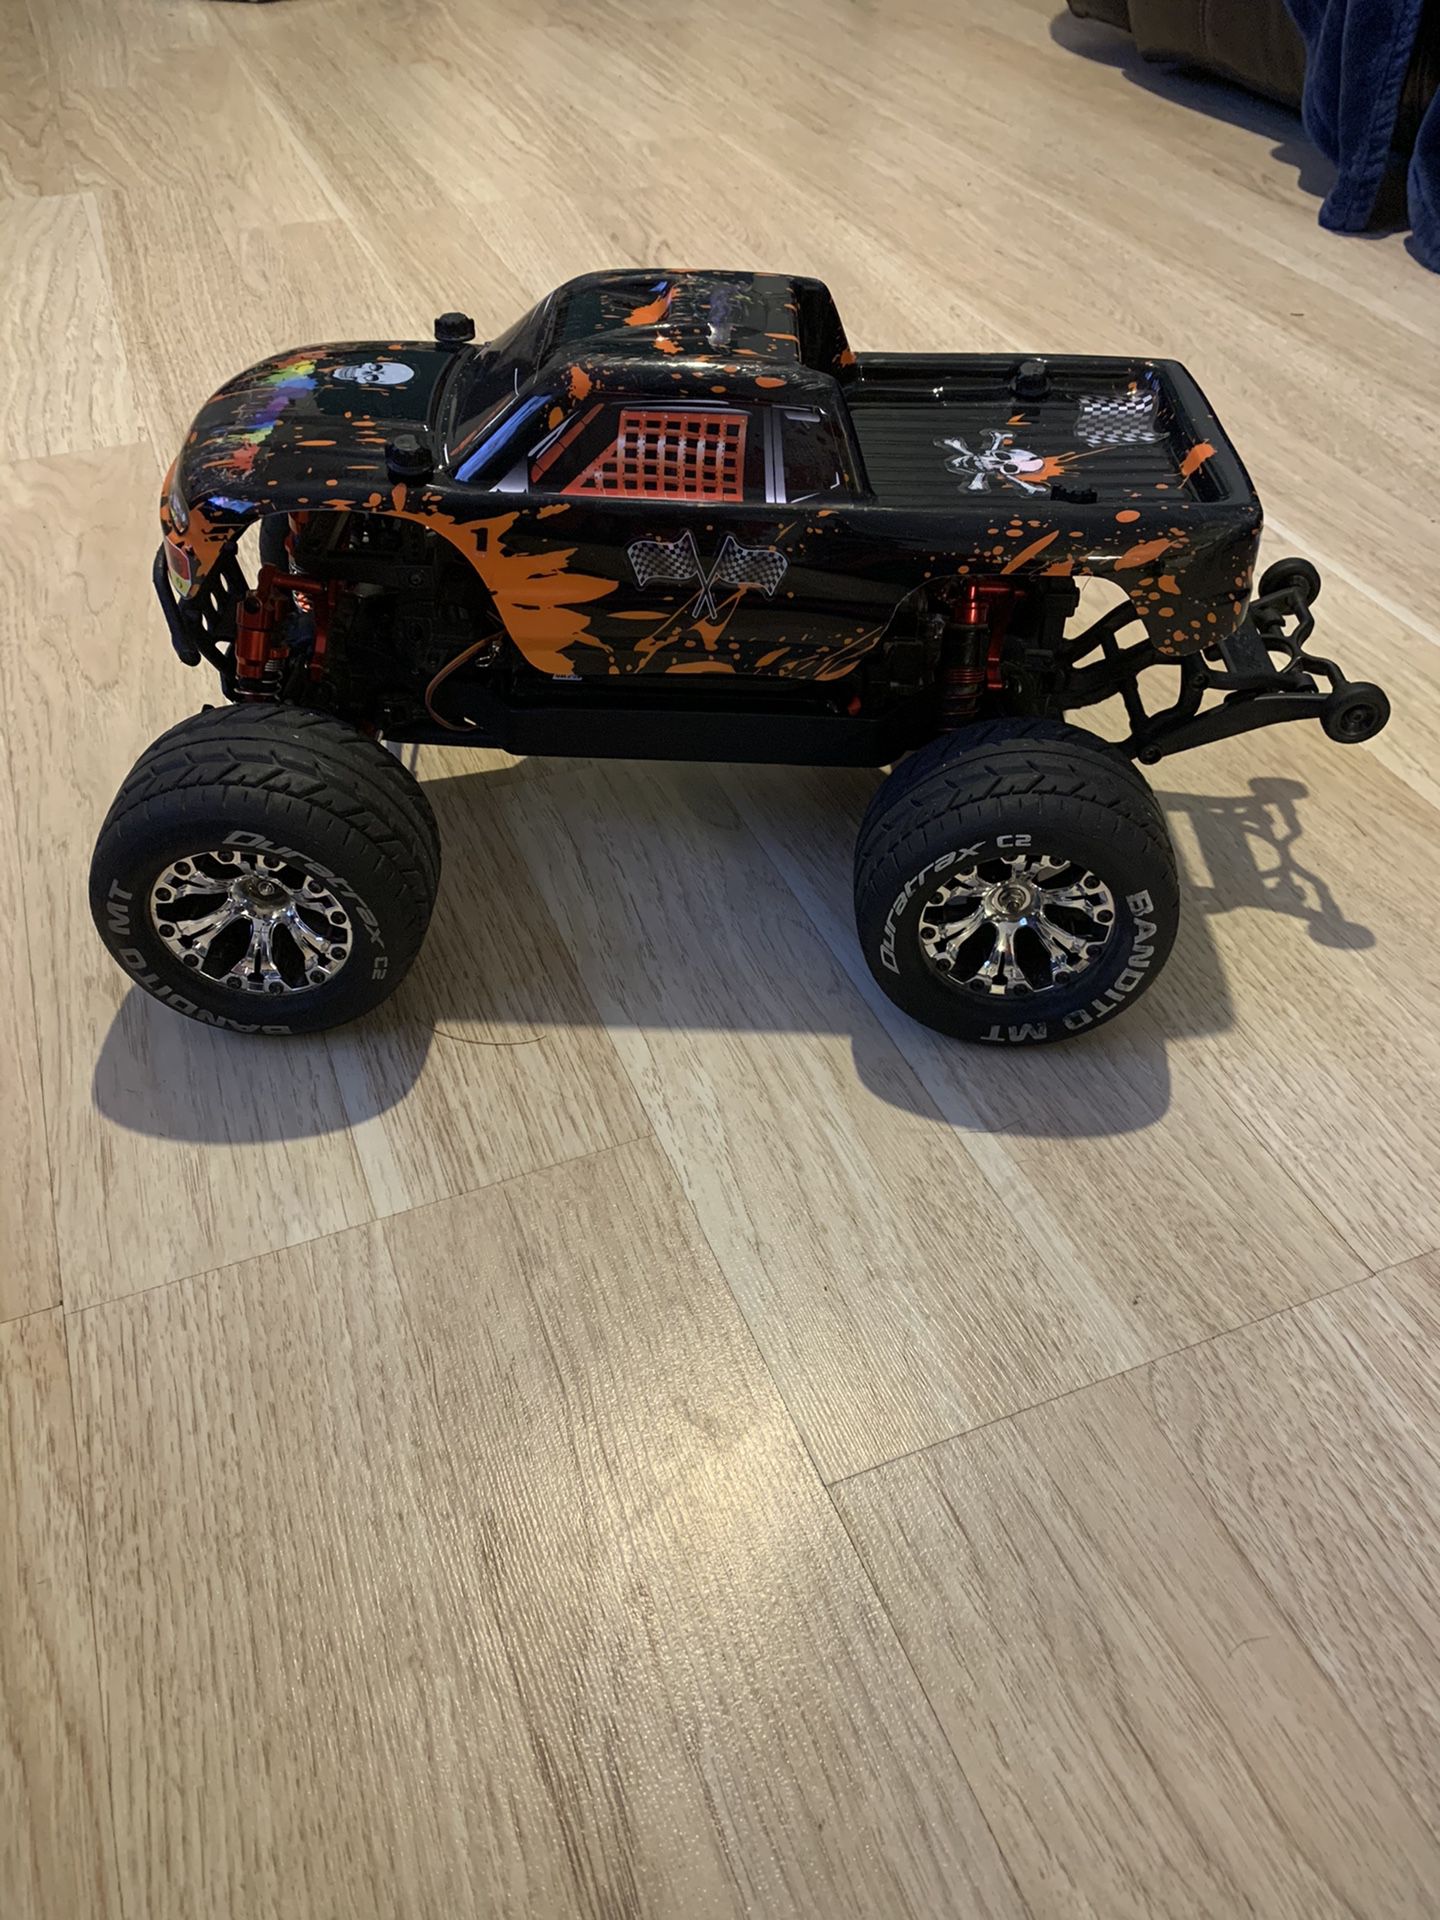 Traxxas 1/10-scale Stampede 4X4 TQ 2.4GHz SUPER UPGRADES 85MPH. Condition is Used.